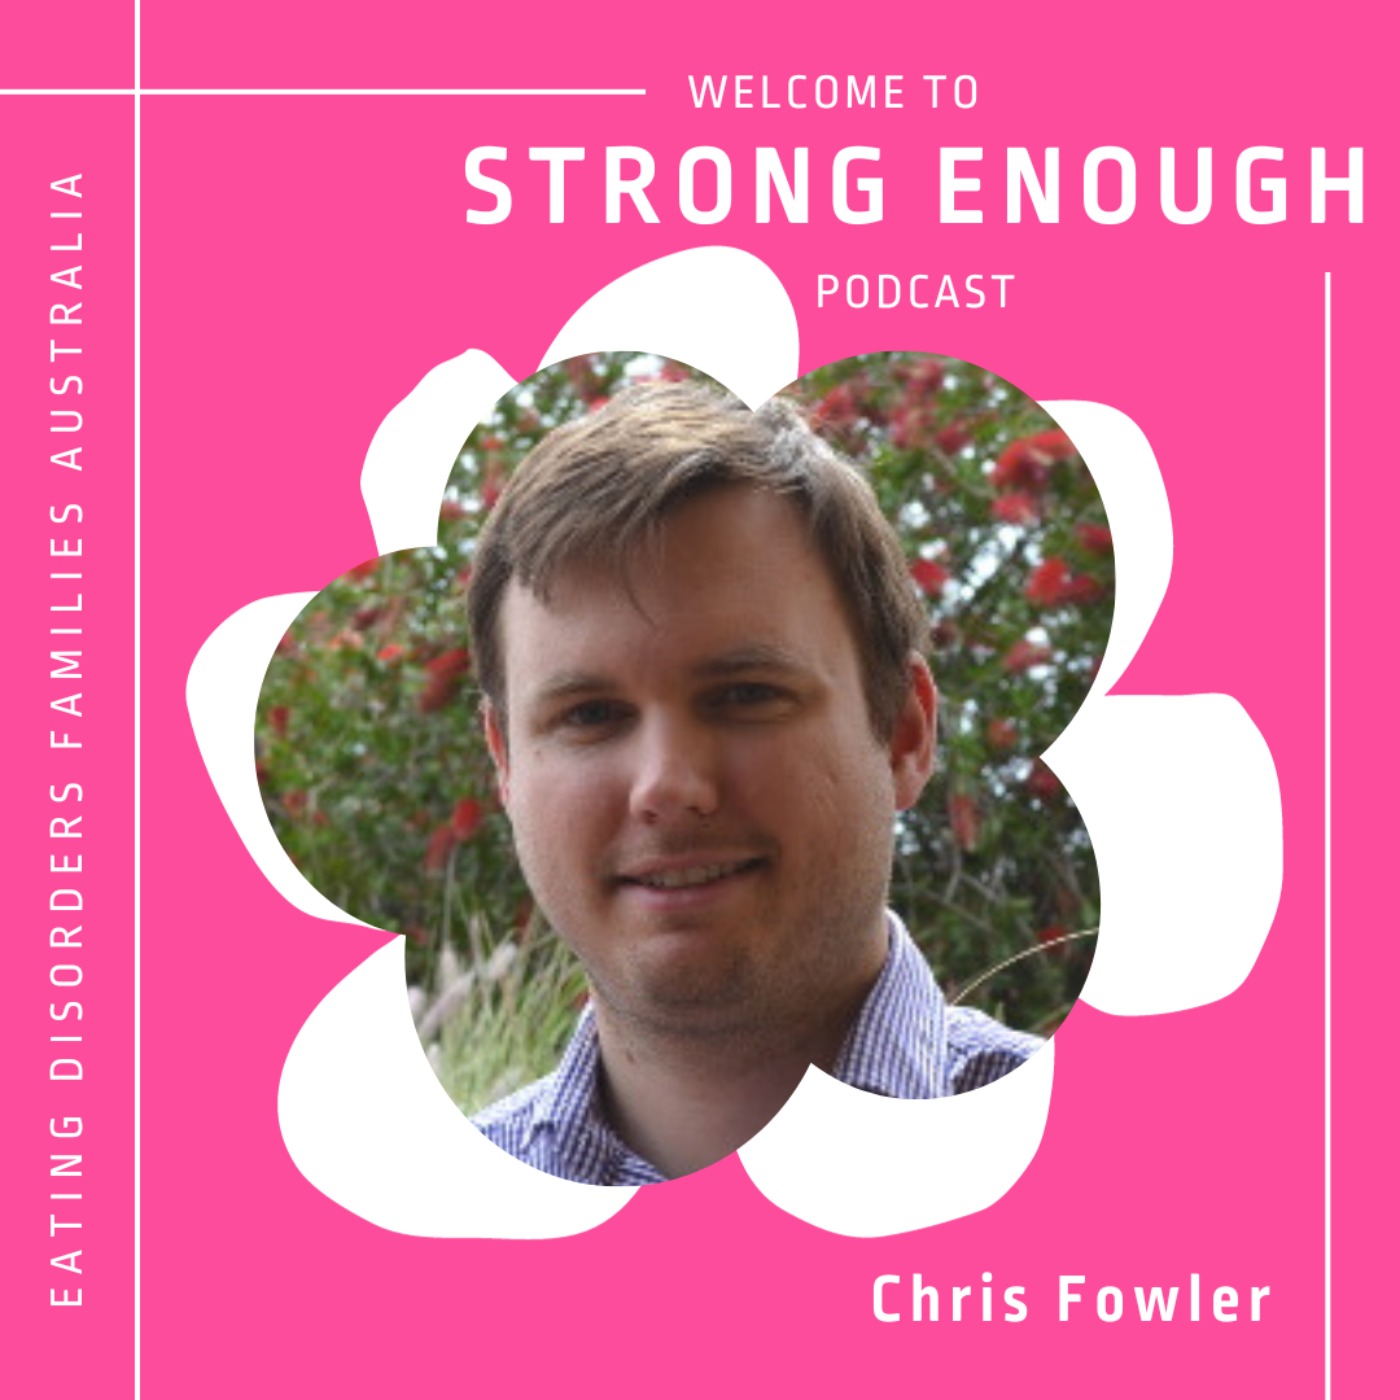 EDFA psychologist Chris Fowler answers your questions about eating disorders